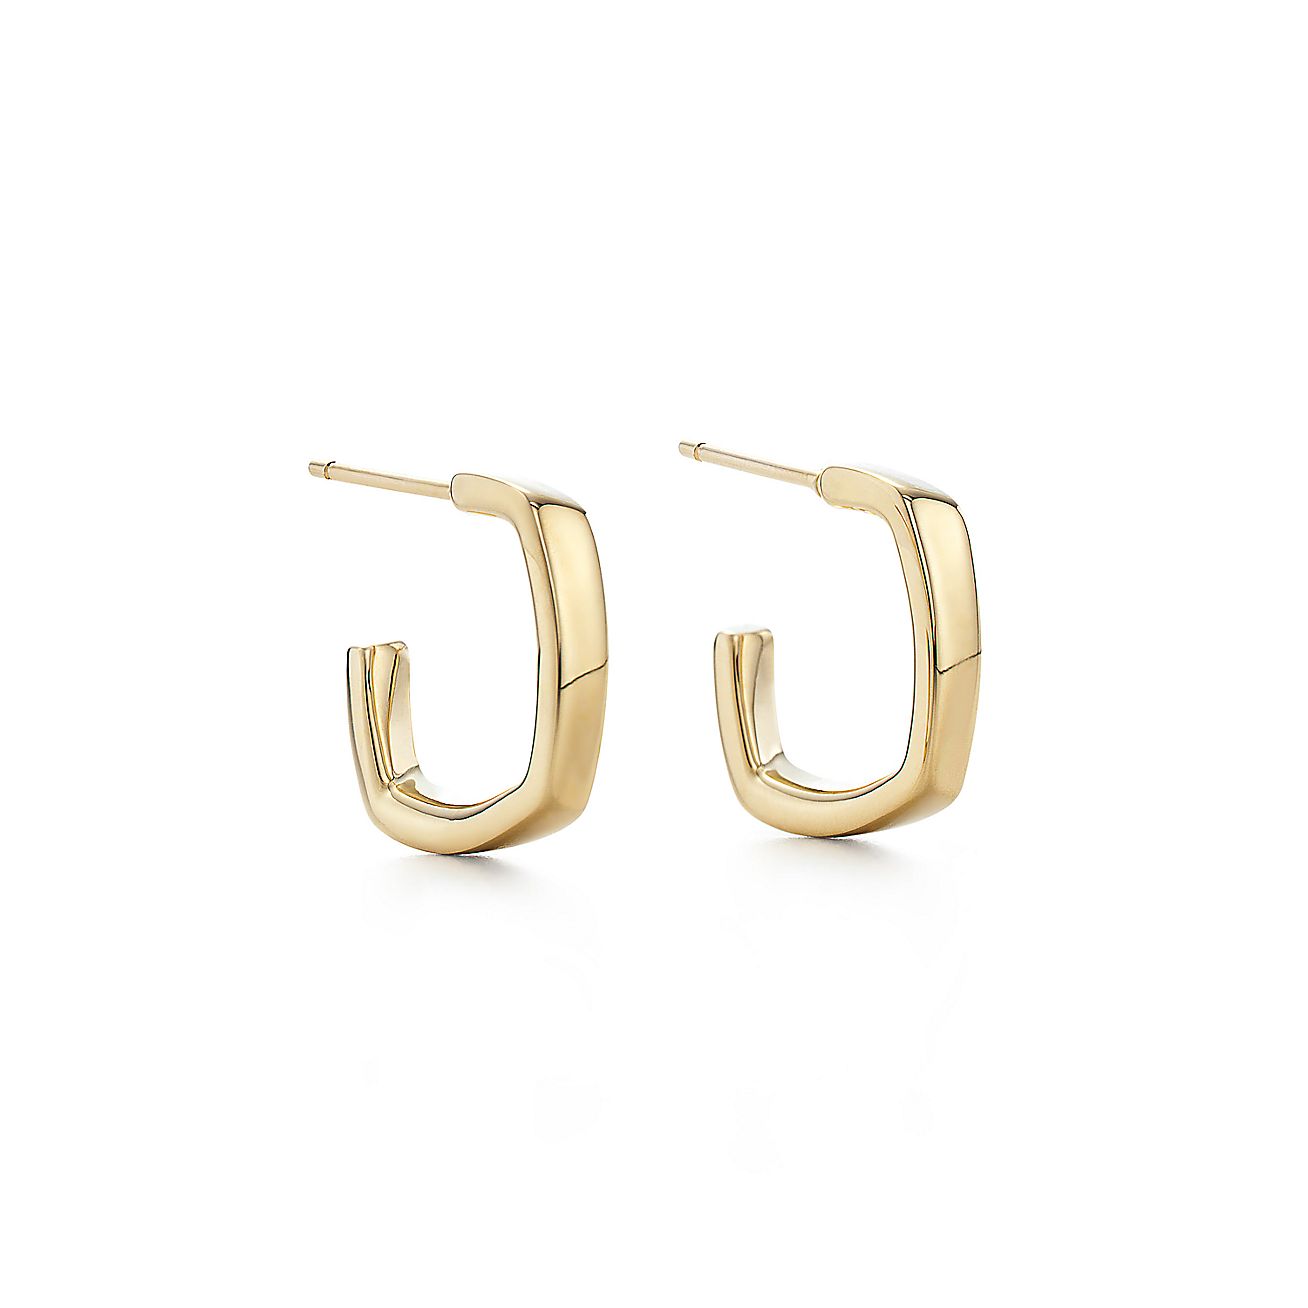 Frank Gehry® Torque hoop earrings in 18k gold, extra small. | Tiffany & Co.